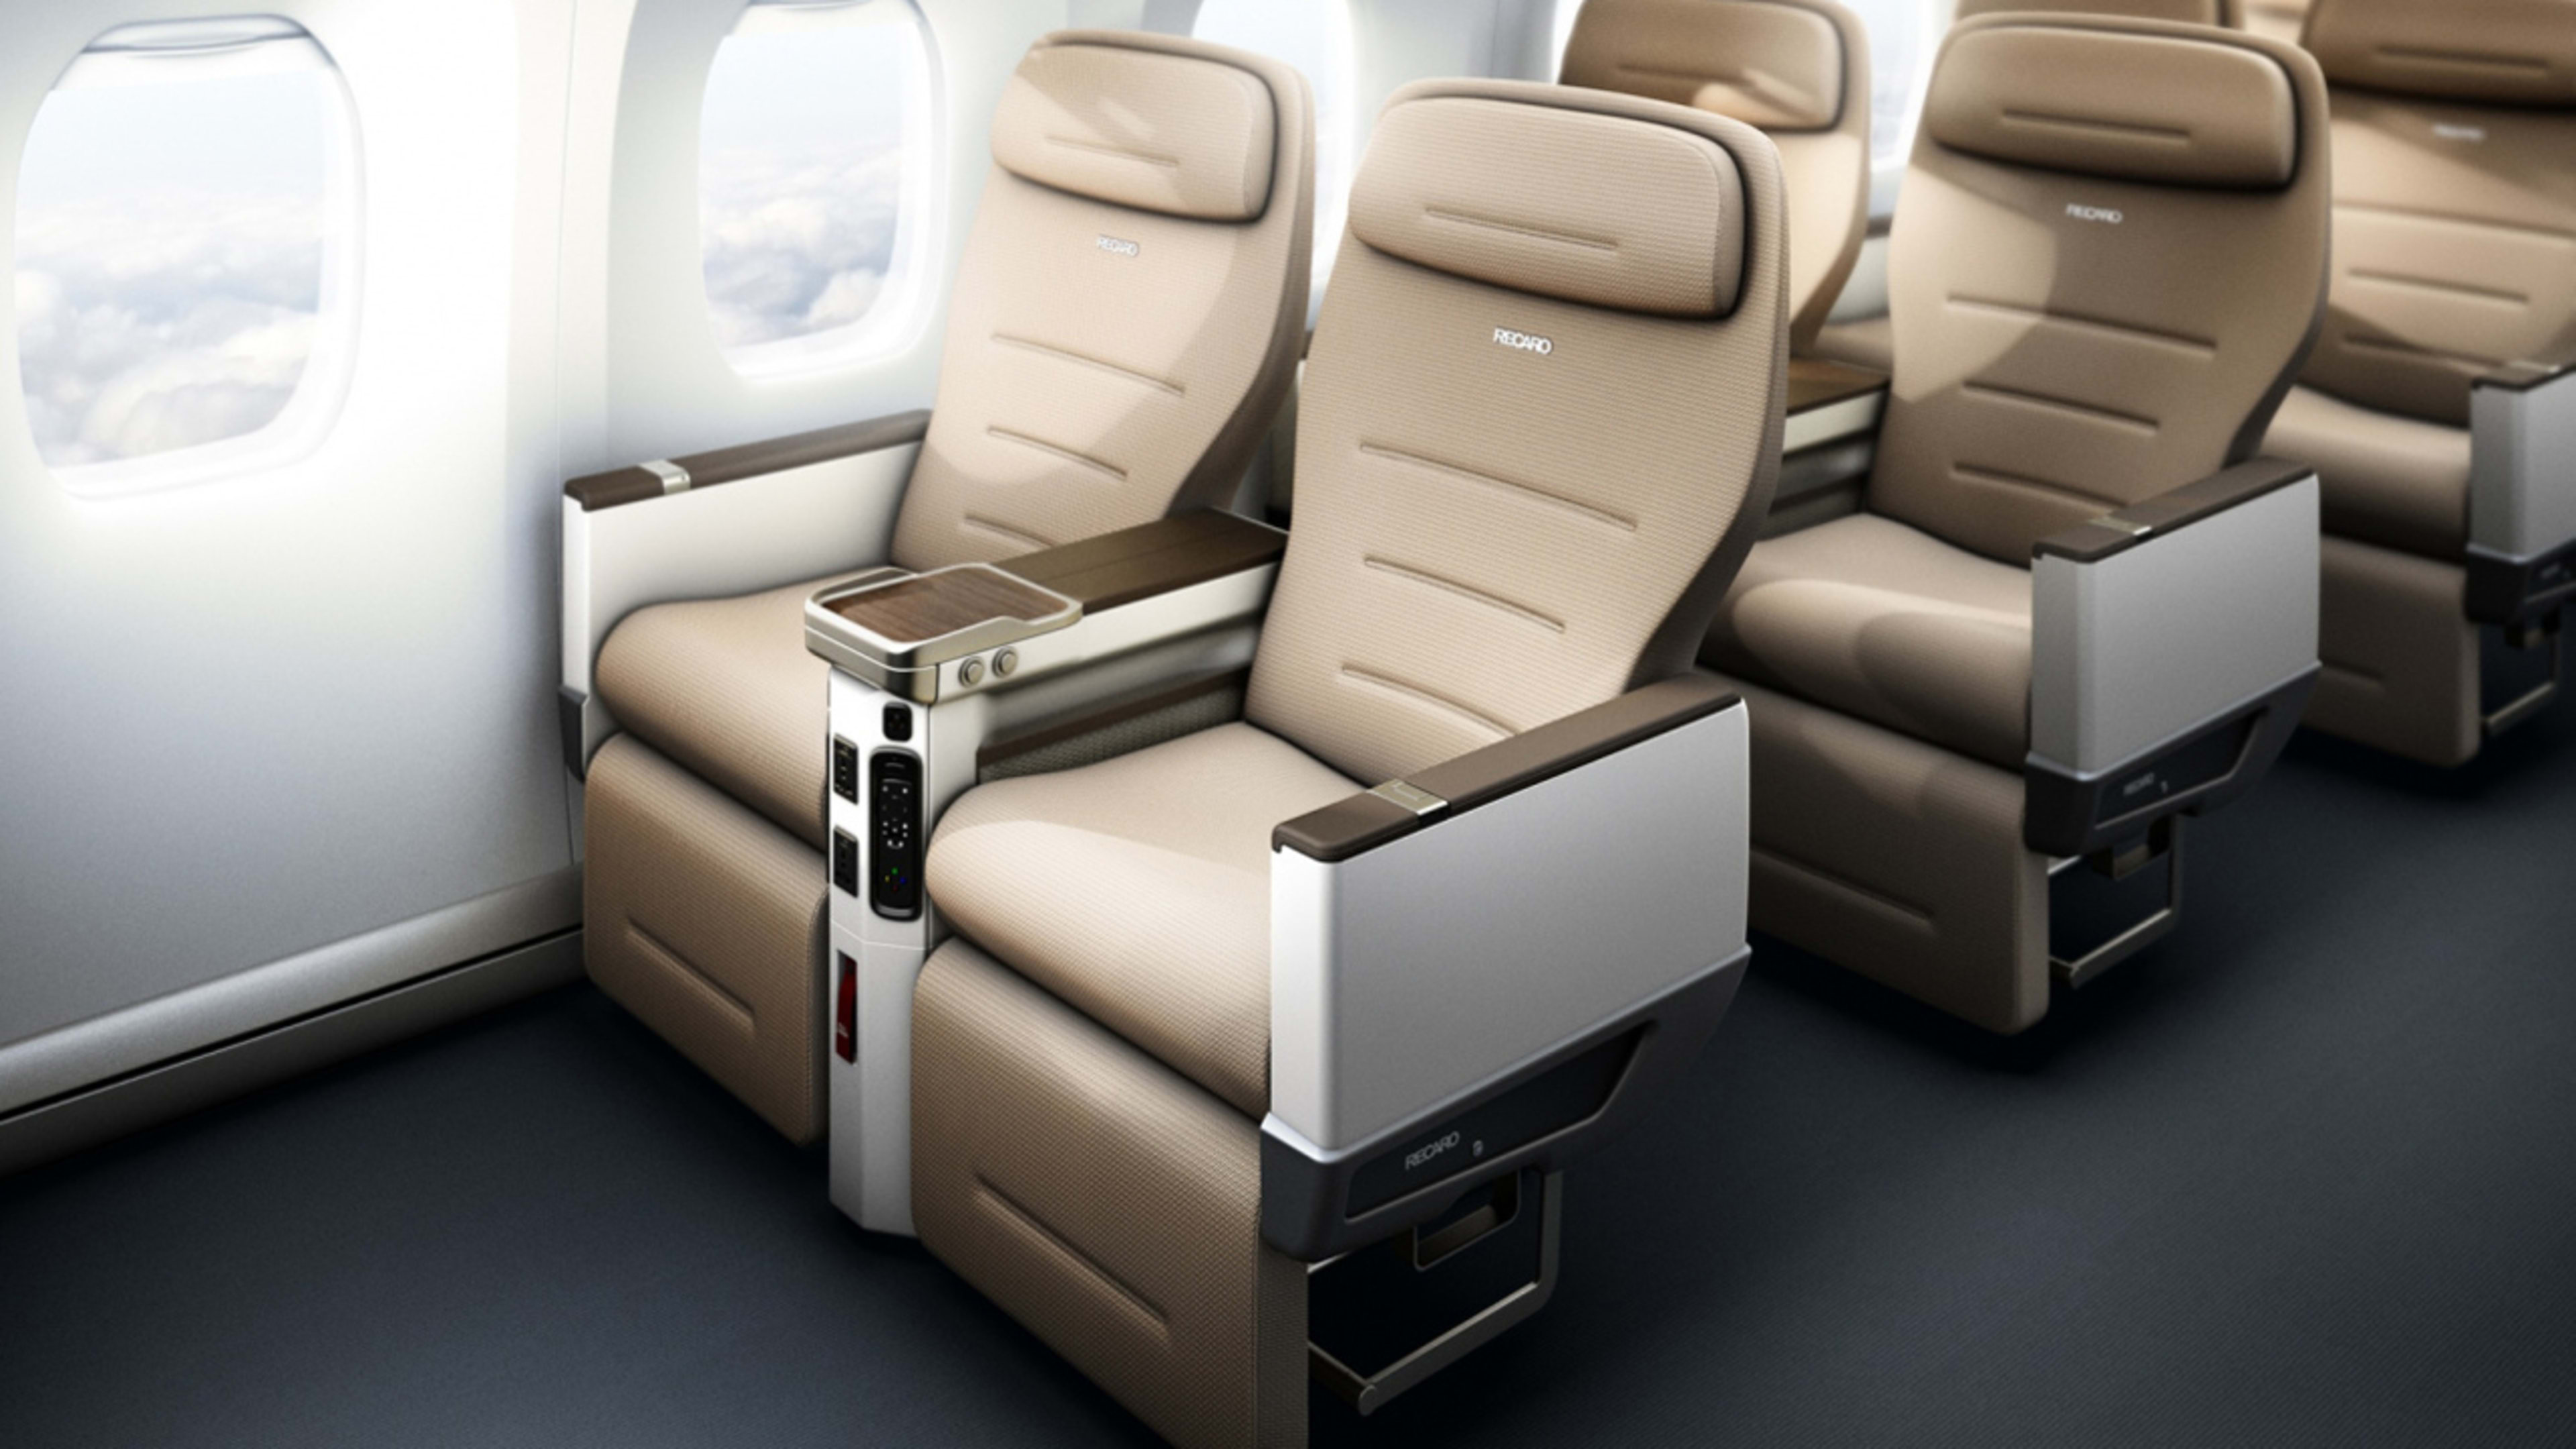 Self-cleaning airplane seats are coming (but only for business class)